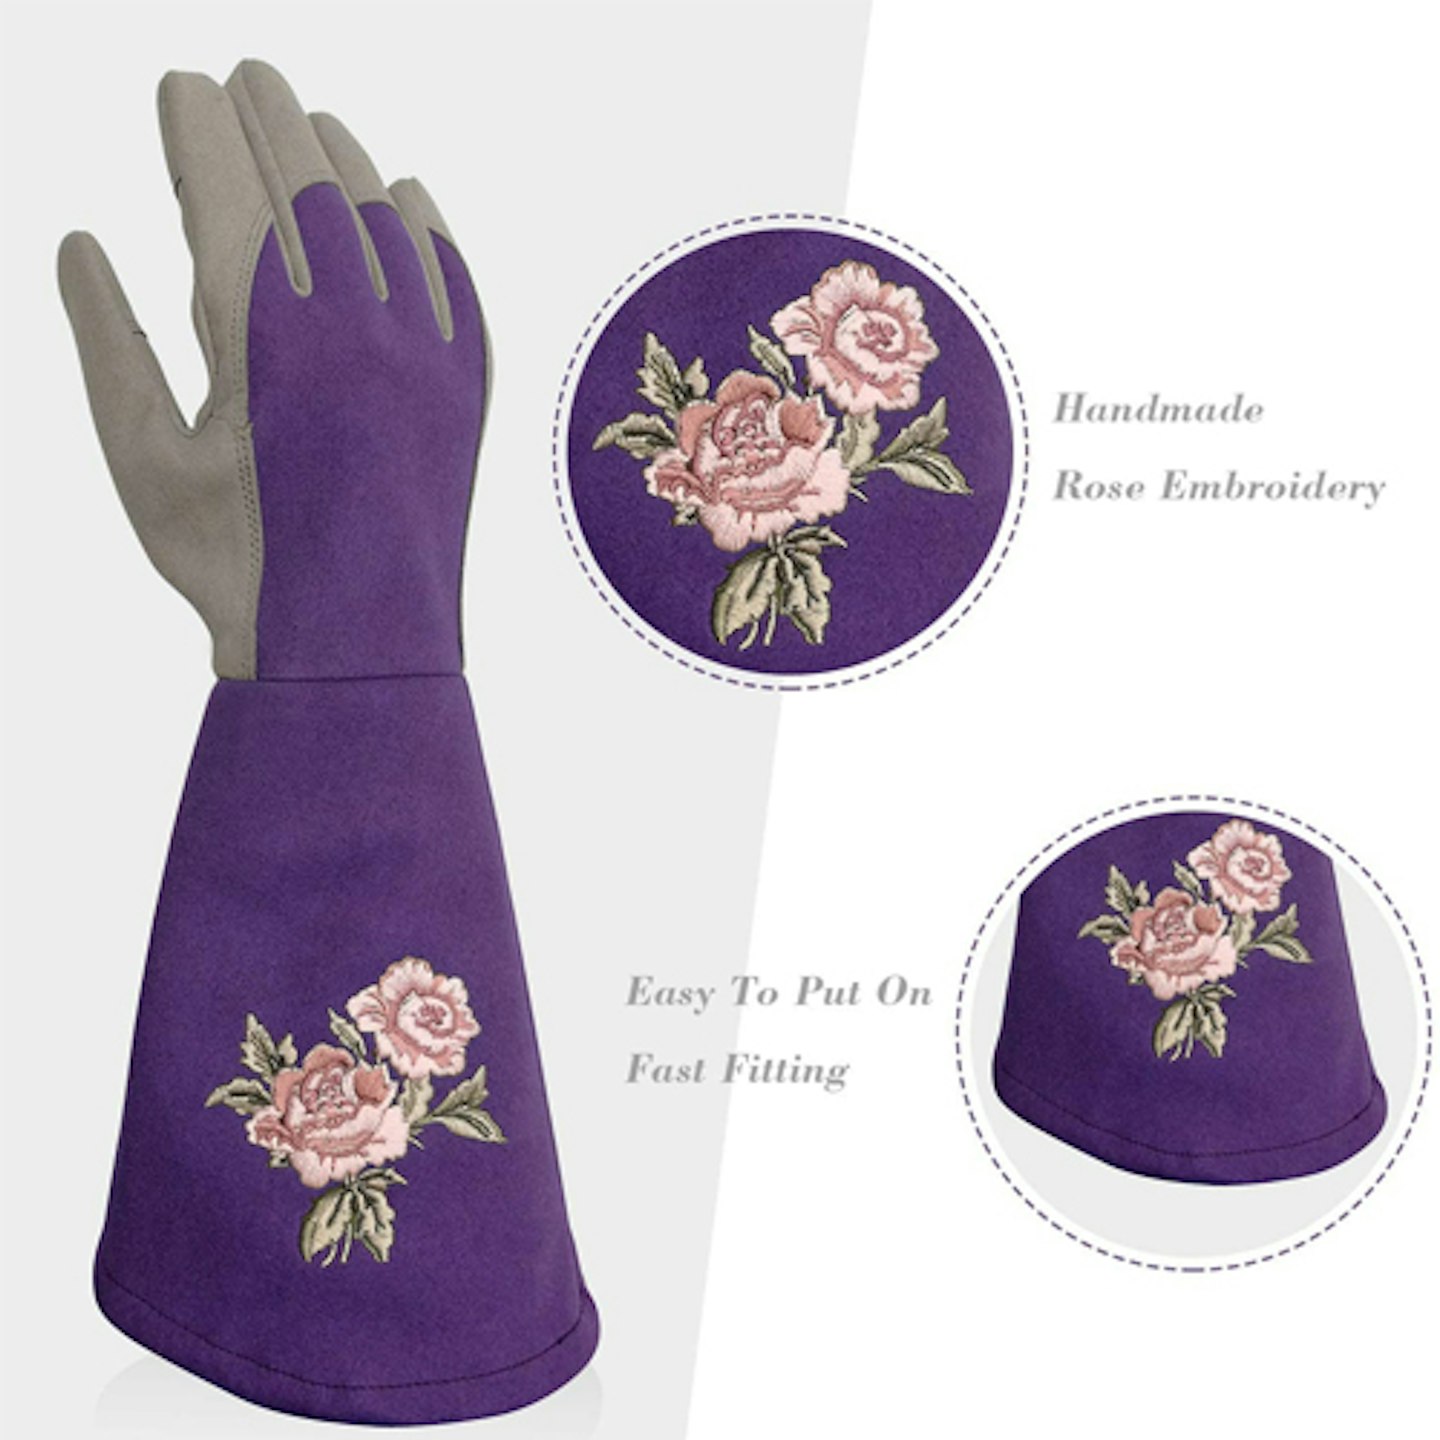 Intra-FIT Rose Embroidery Pruning Gloves Gardening Gloves